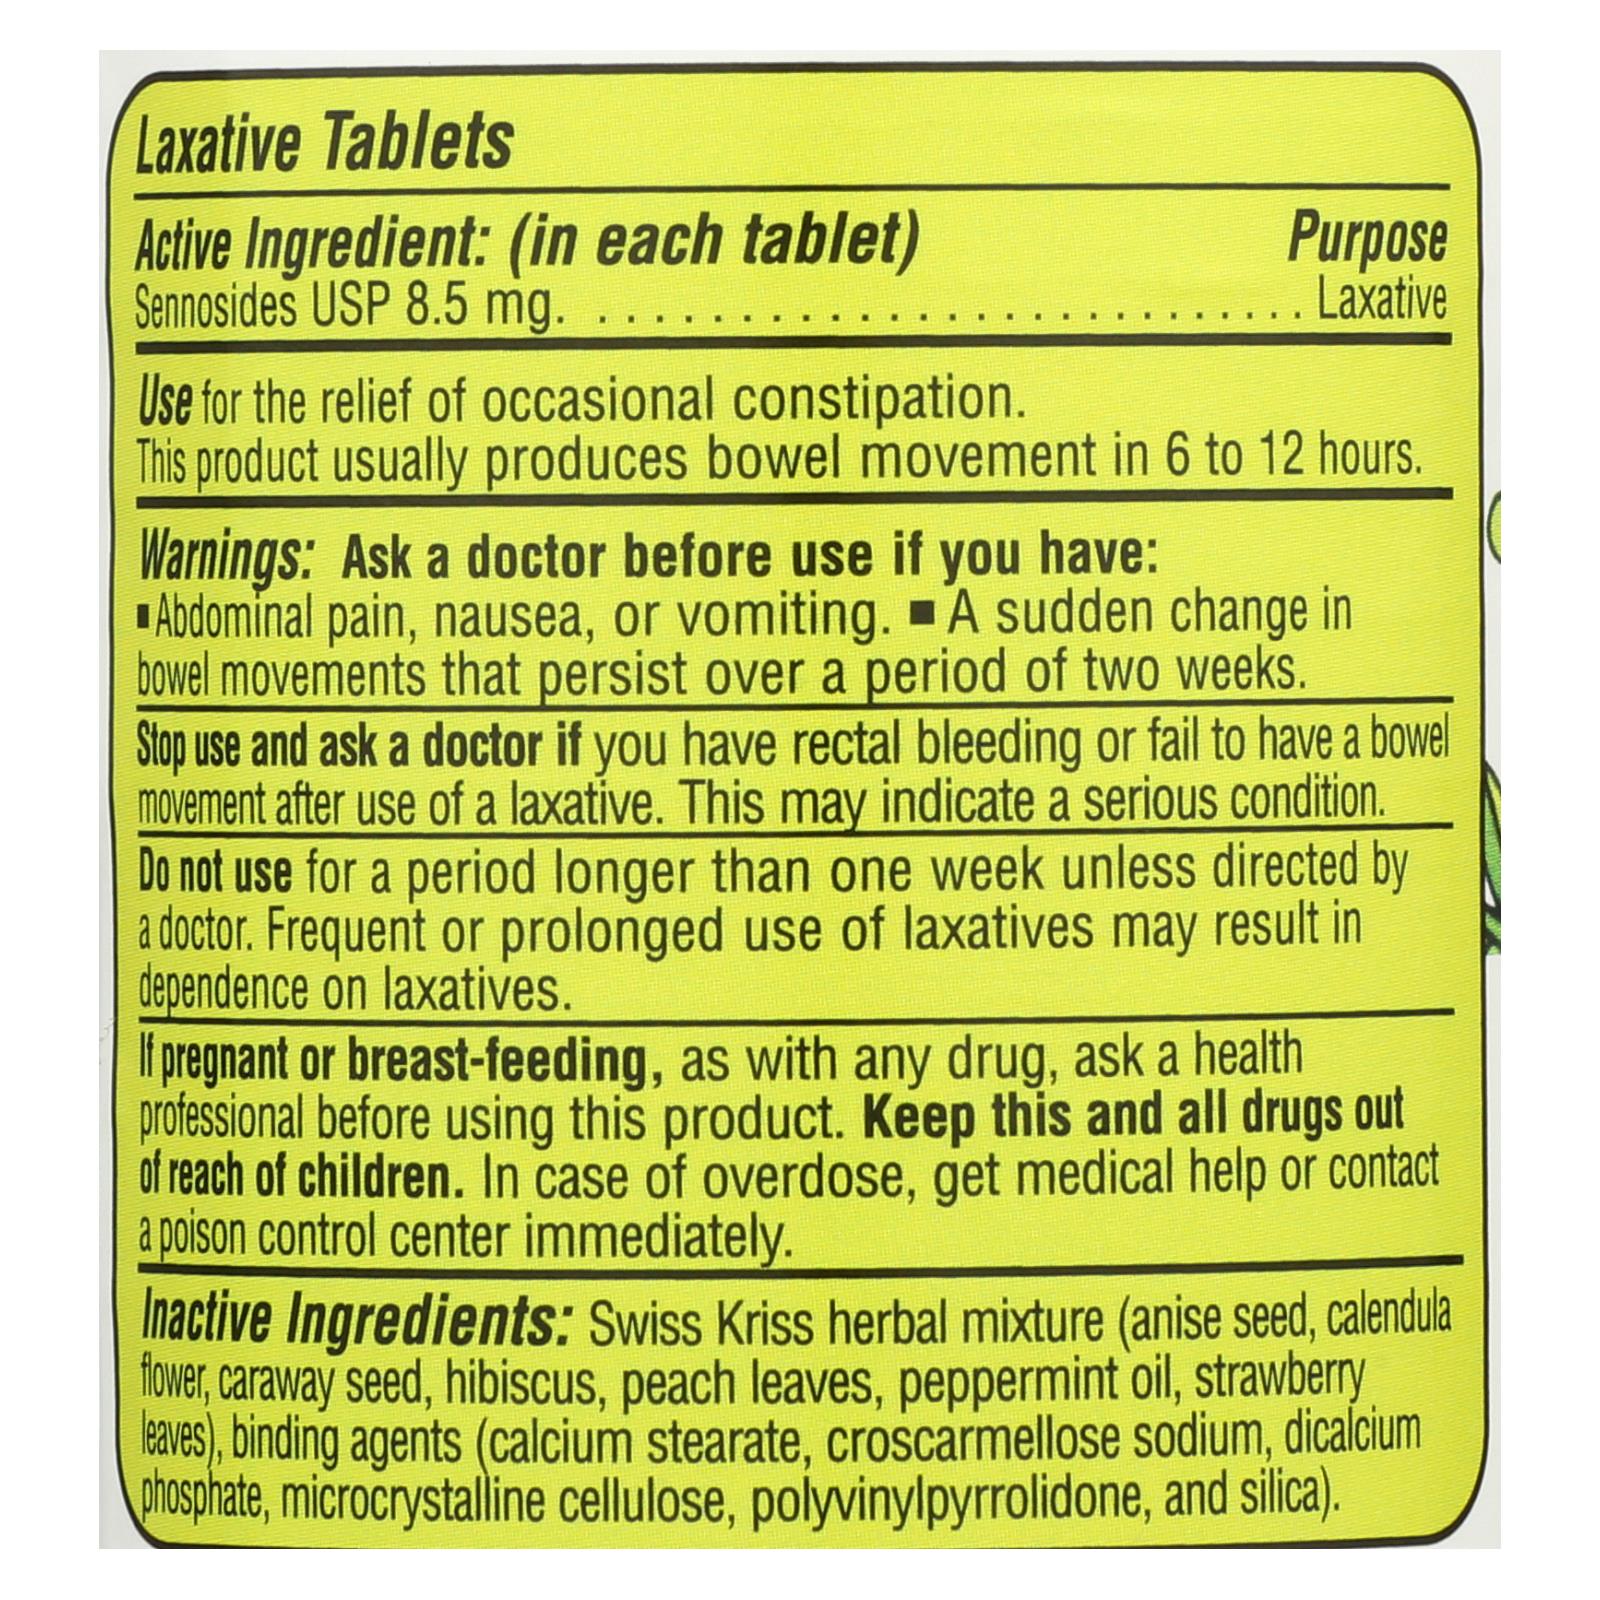 Modern Natural Products Swiss Kriss Herbal Laxative - 120 Tablets